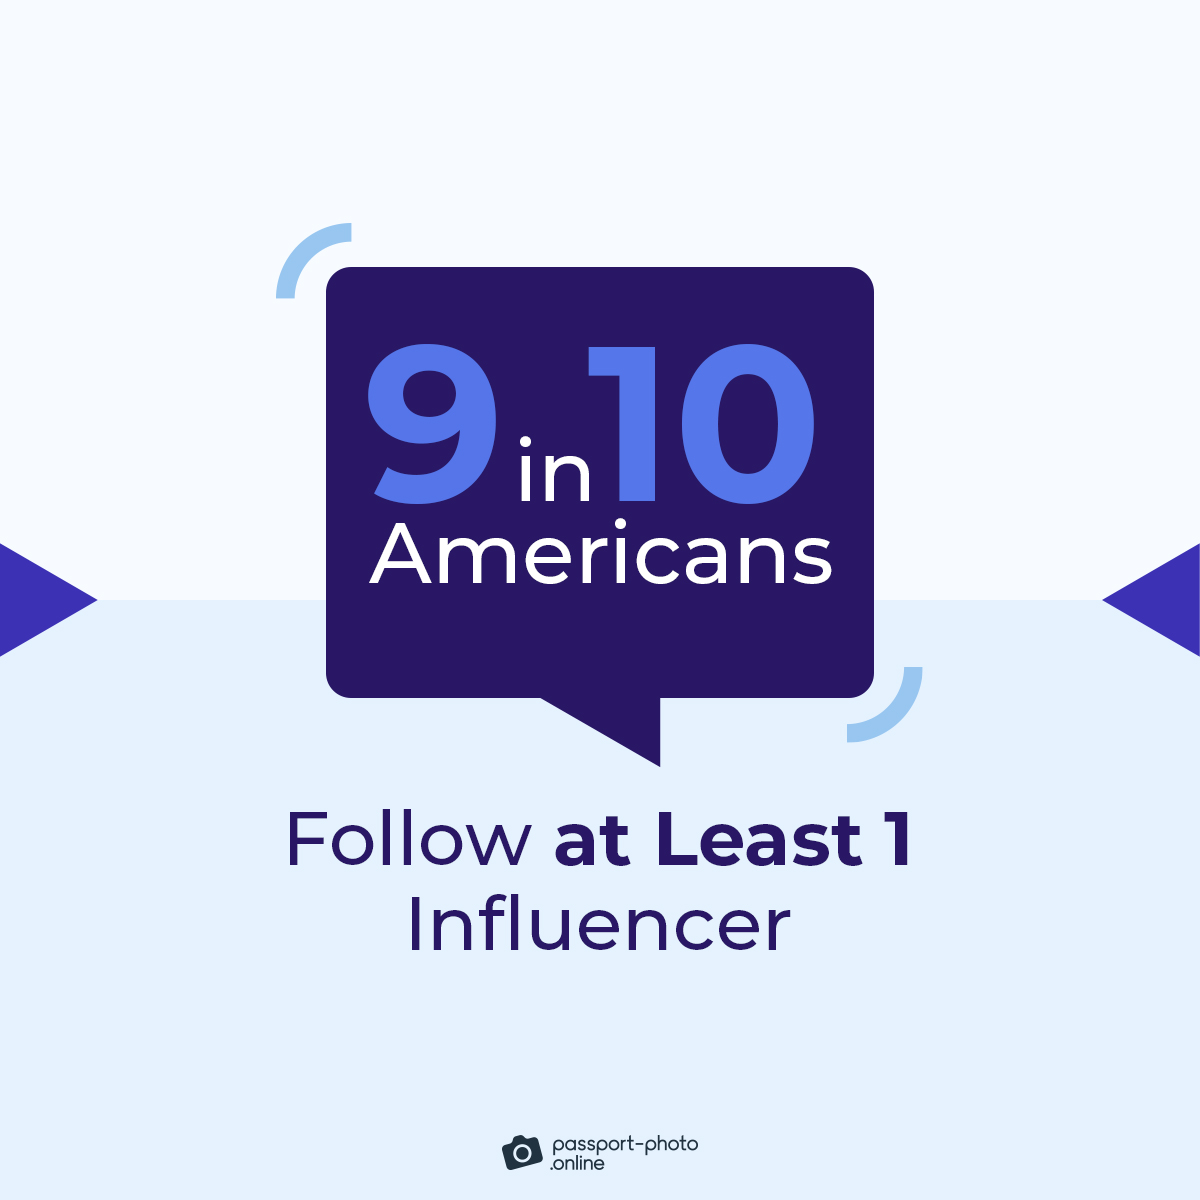 9 in 10 Americans follow at least one influencer